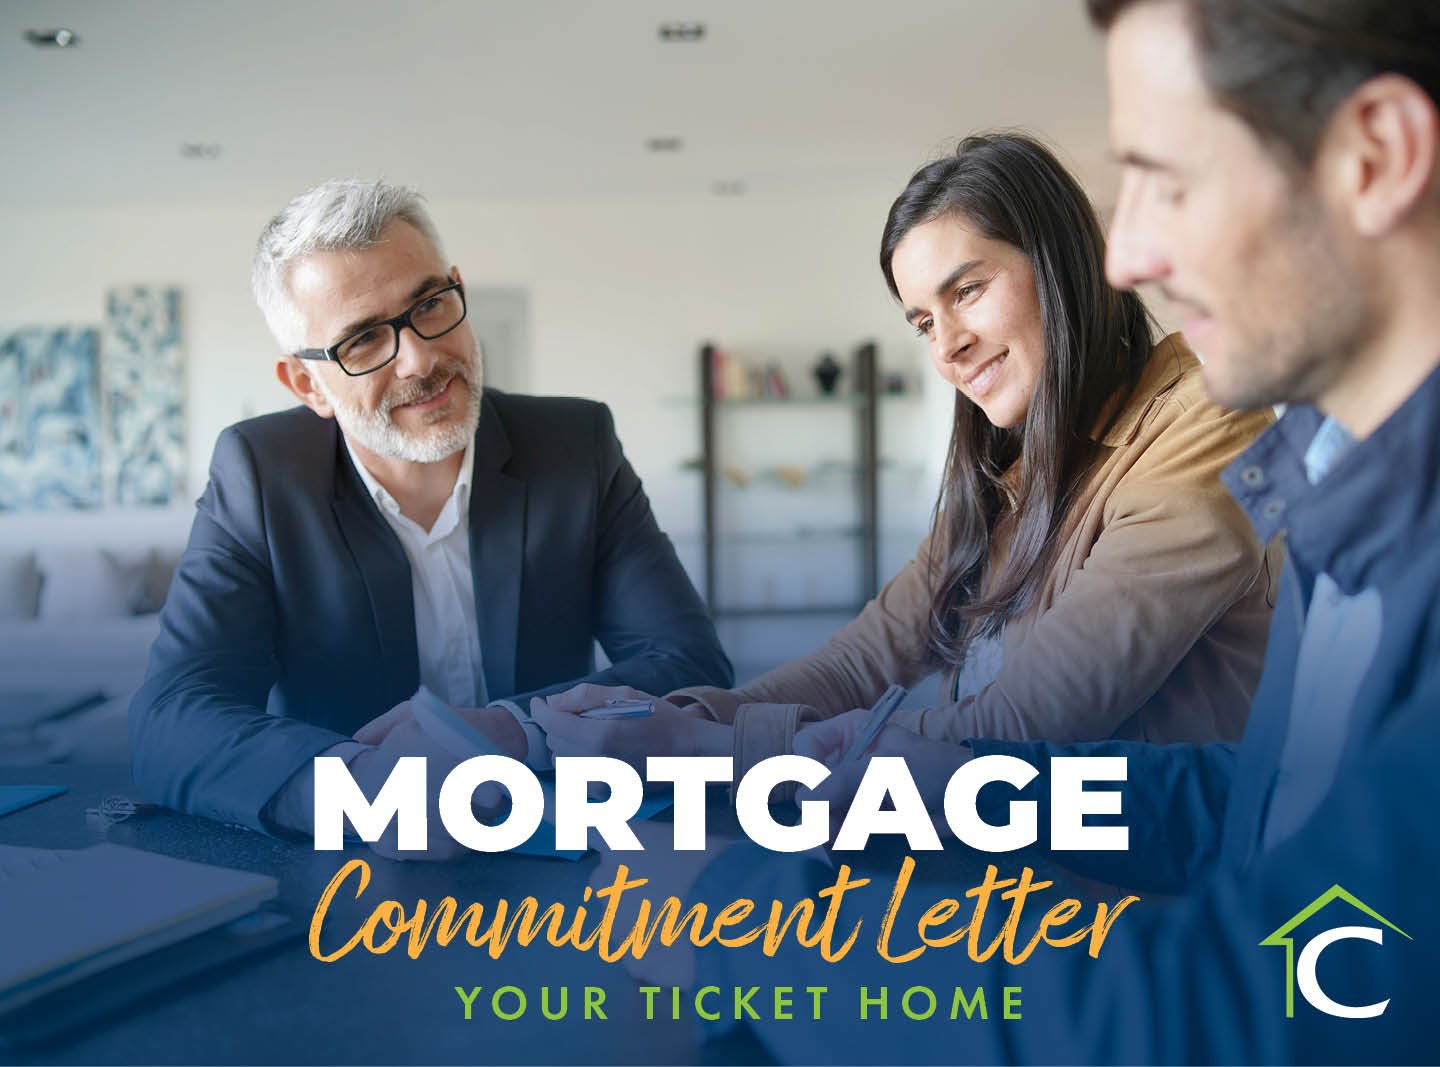 Mortgage Commitment Letter: Your Ticket Home text with loan officer chatting with couple in background